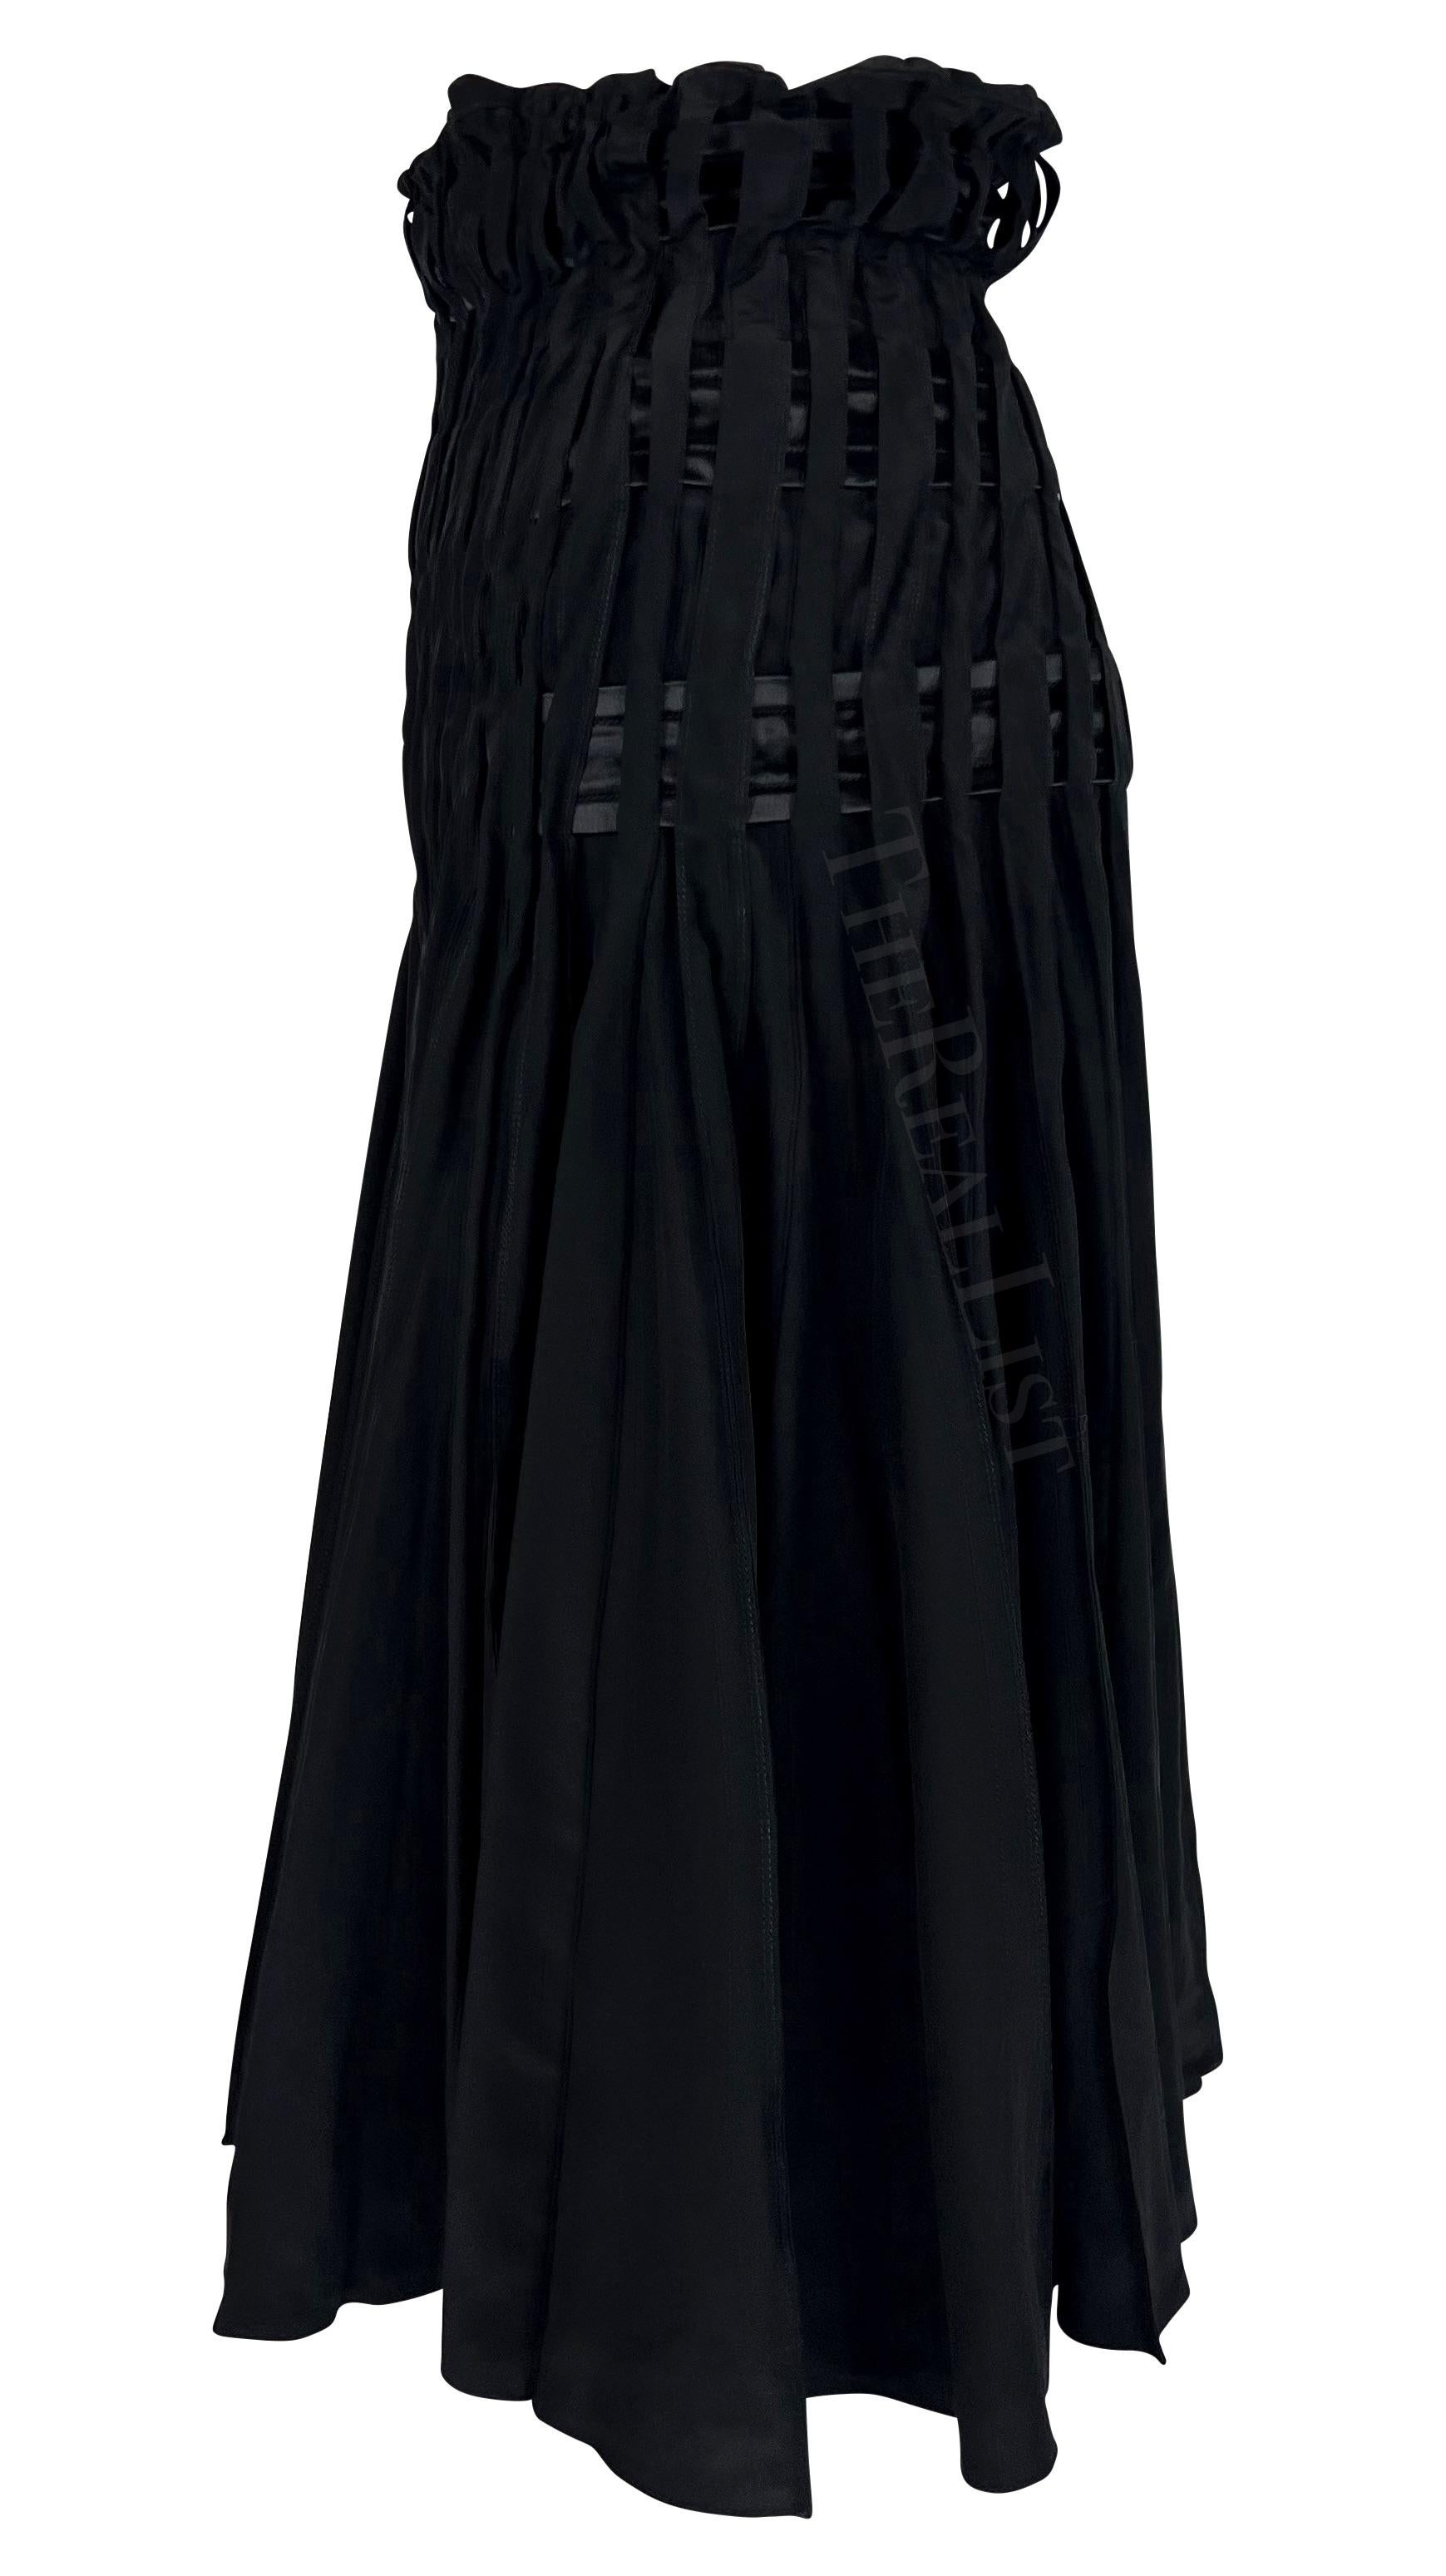 F/W 2001 Yves Saint Laurent by Tom Ford Pleated Black Satin Flare Skirt In Excellent Condition For Sale In West Hollywood, CA